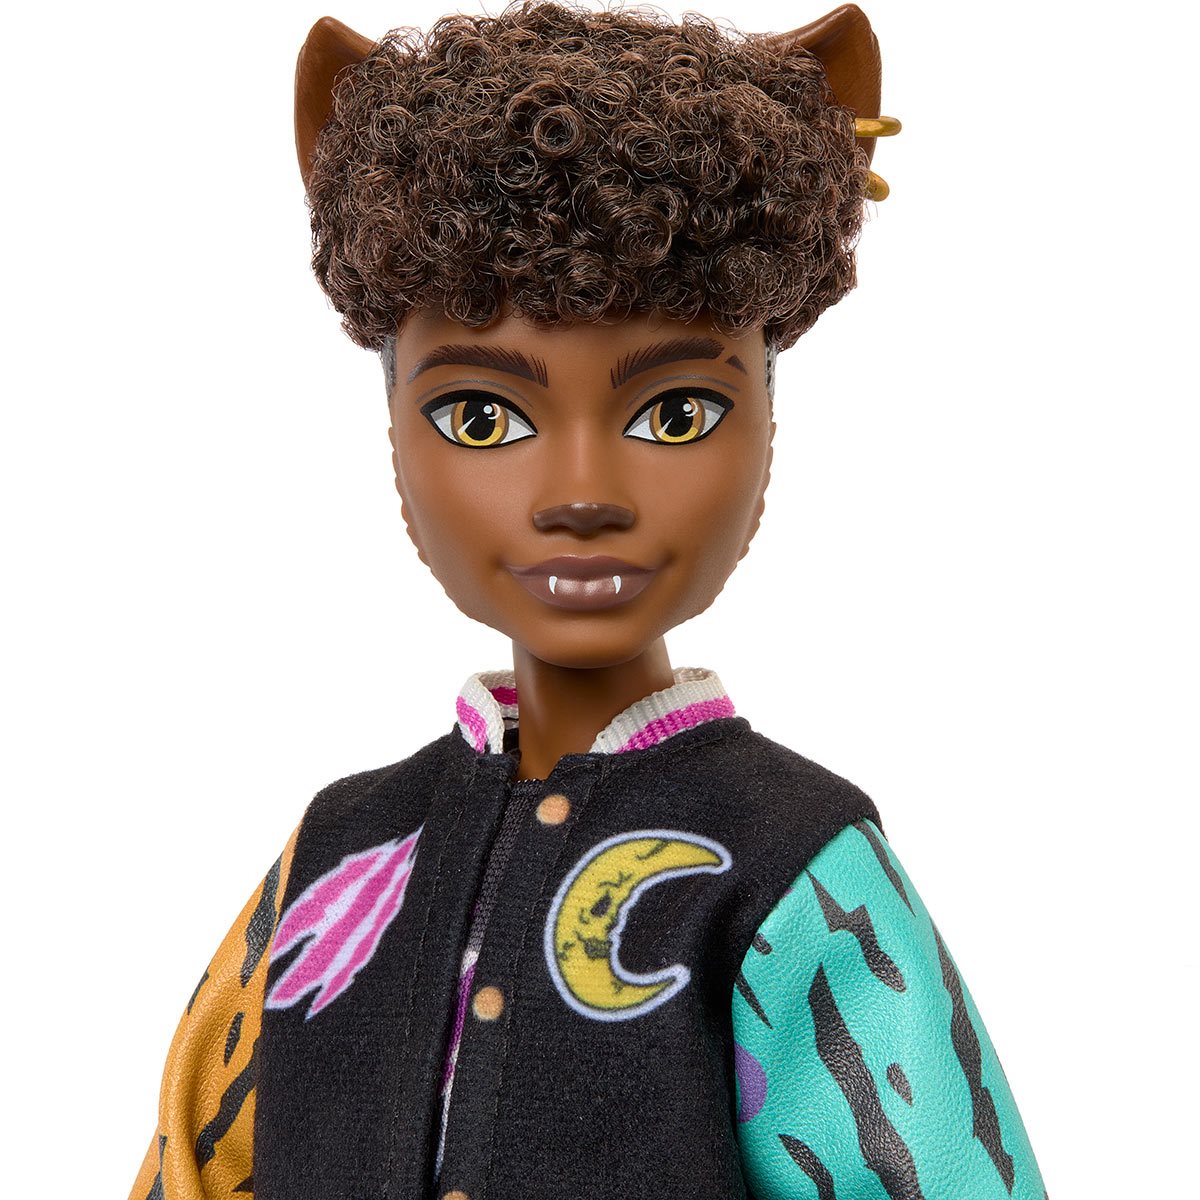 New Monster High Clawdeen Wolf Dolls Toy Action Figures Toys G3